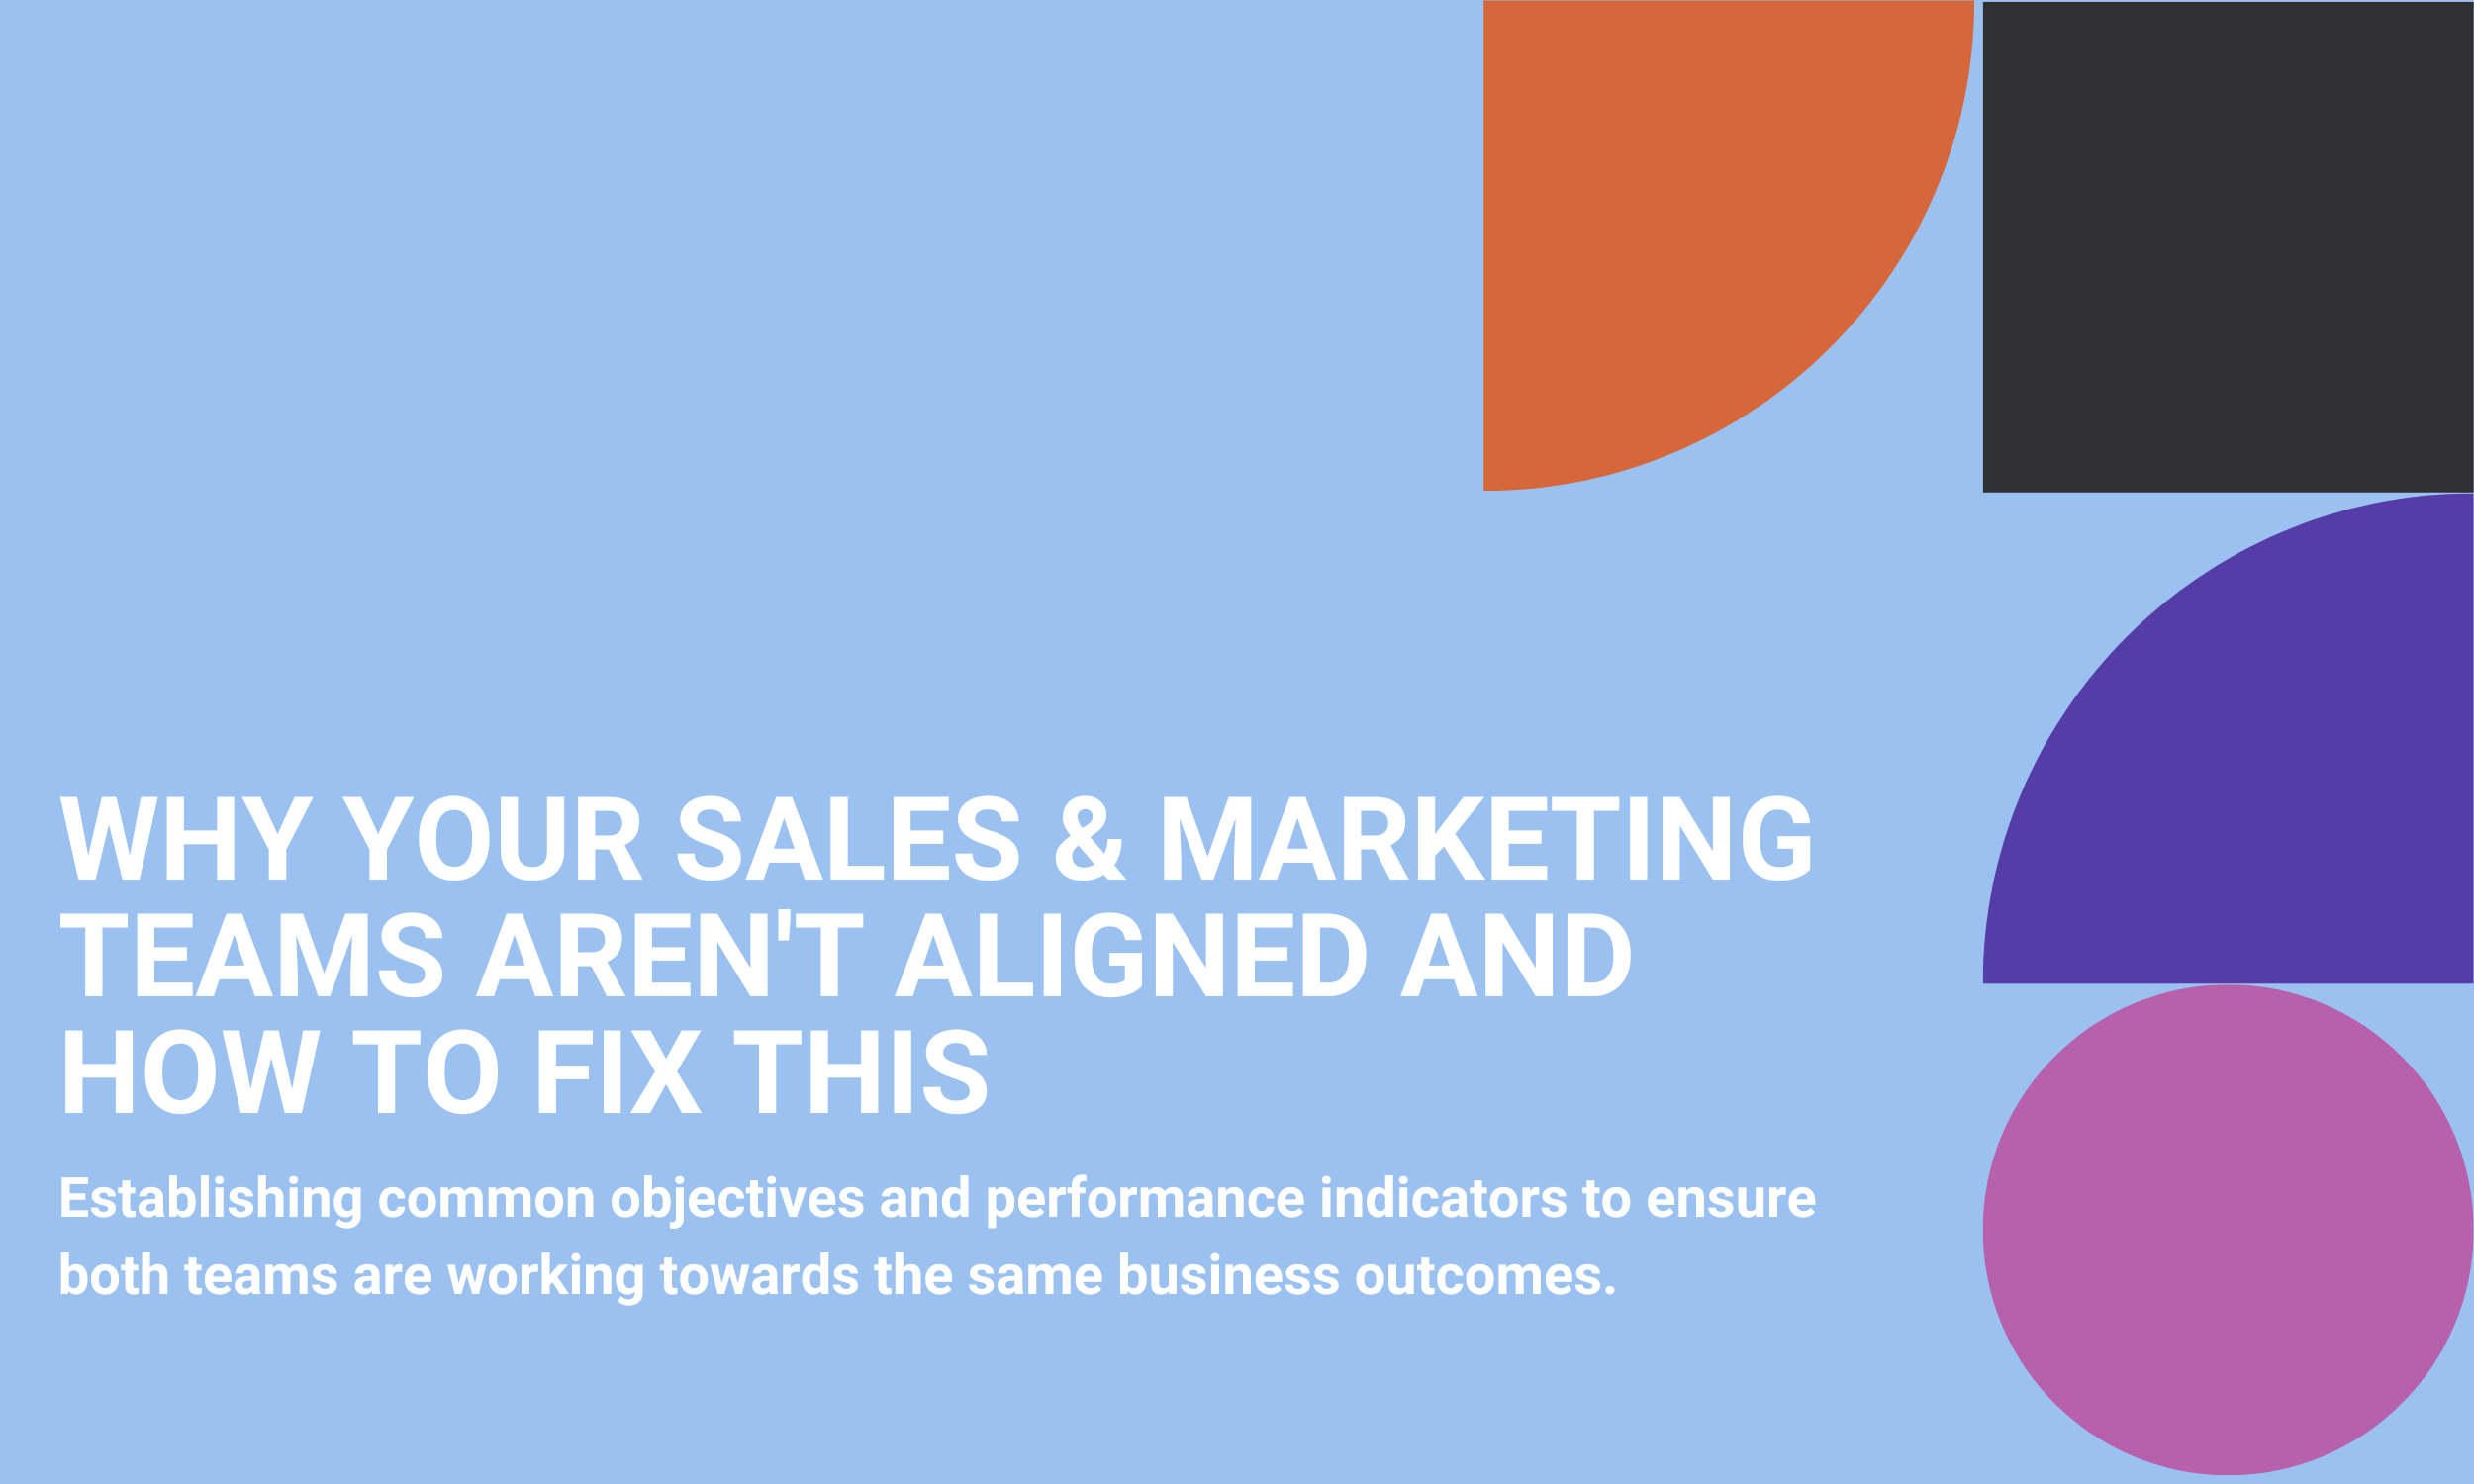 Why Your Sales & Marketing Teams Aren't Aligned and How to Fix This